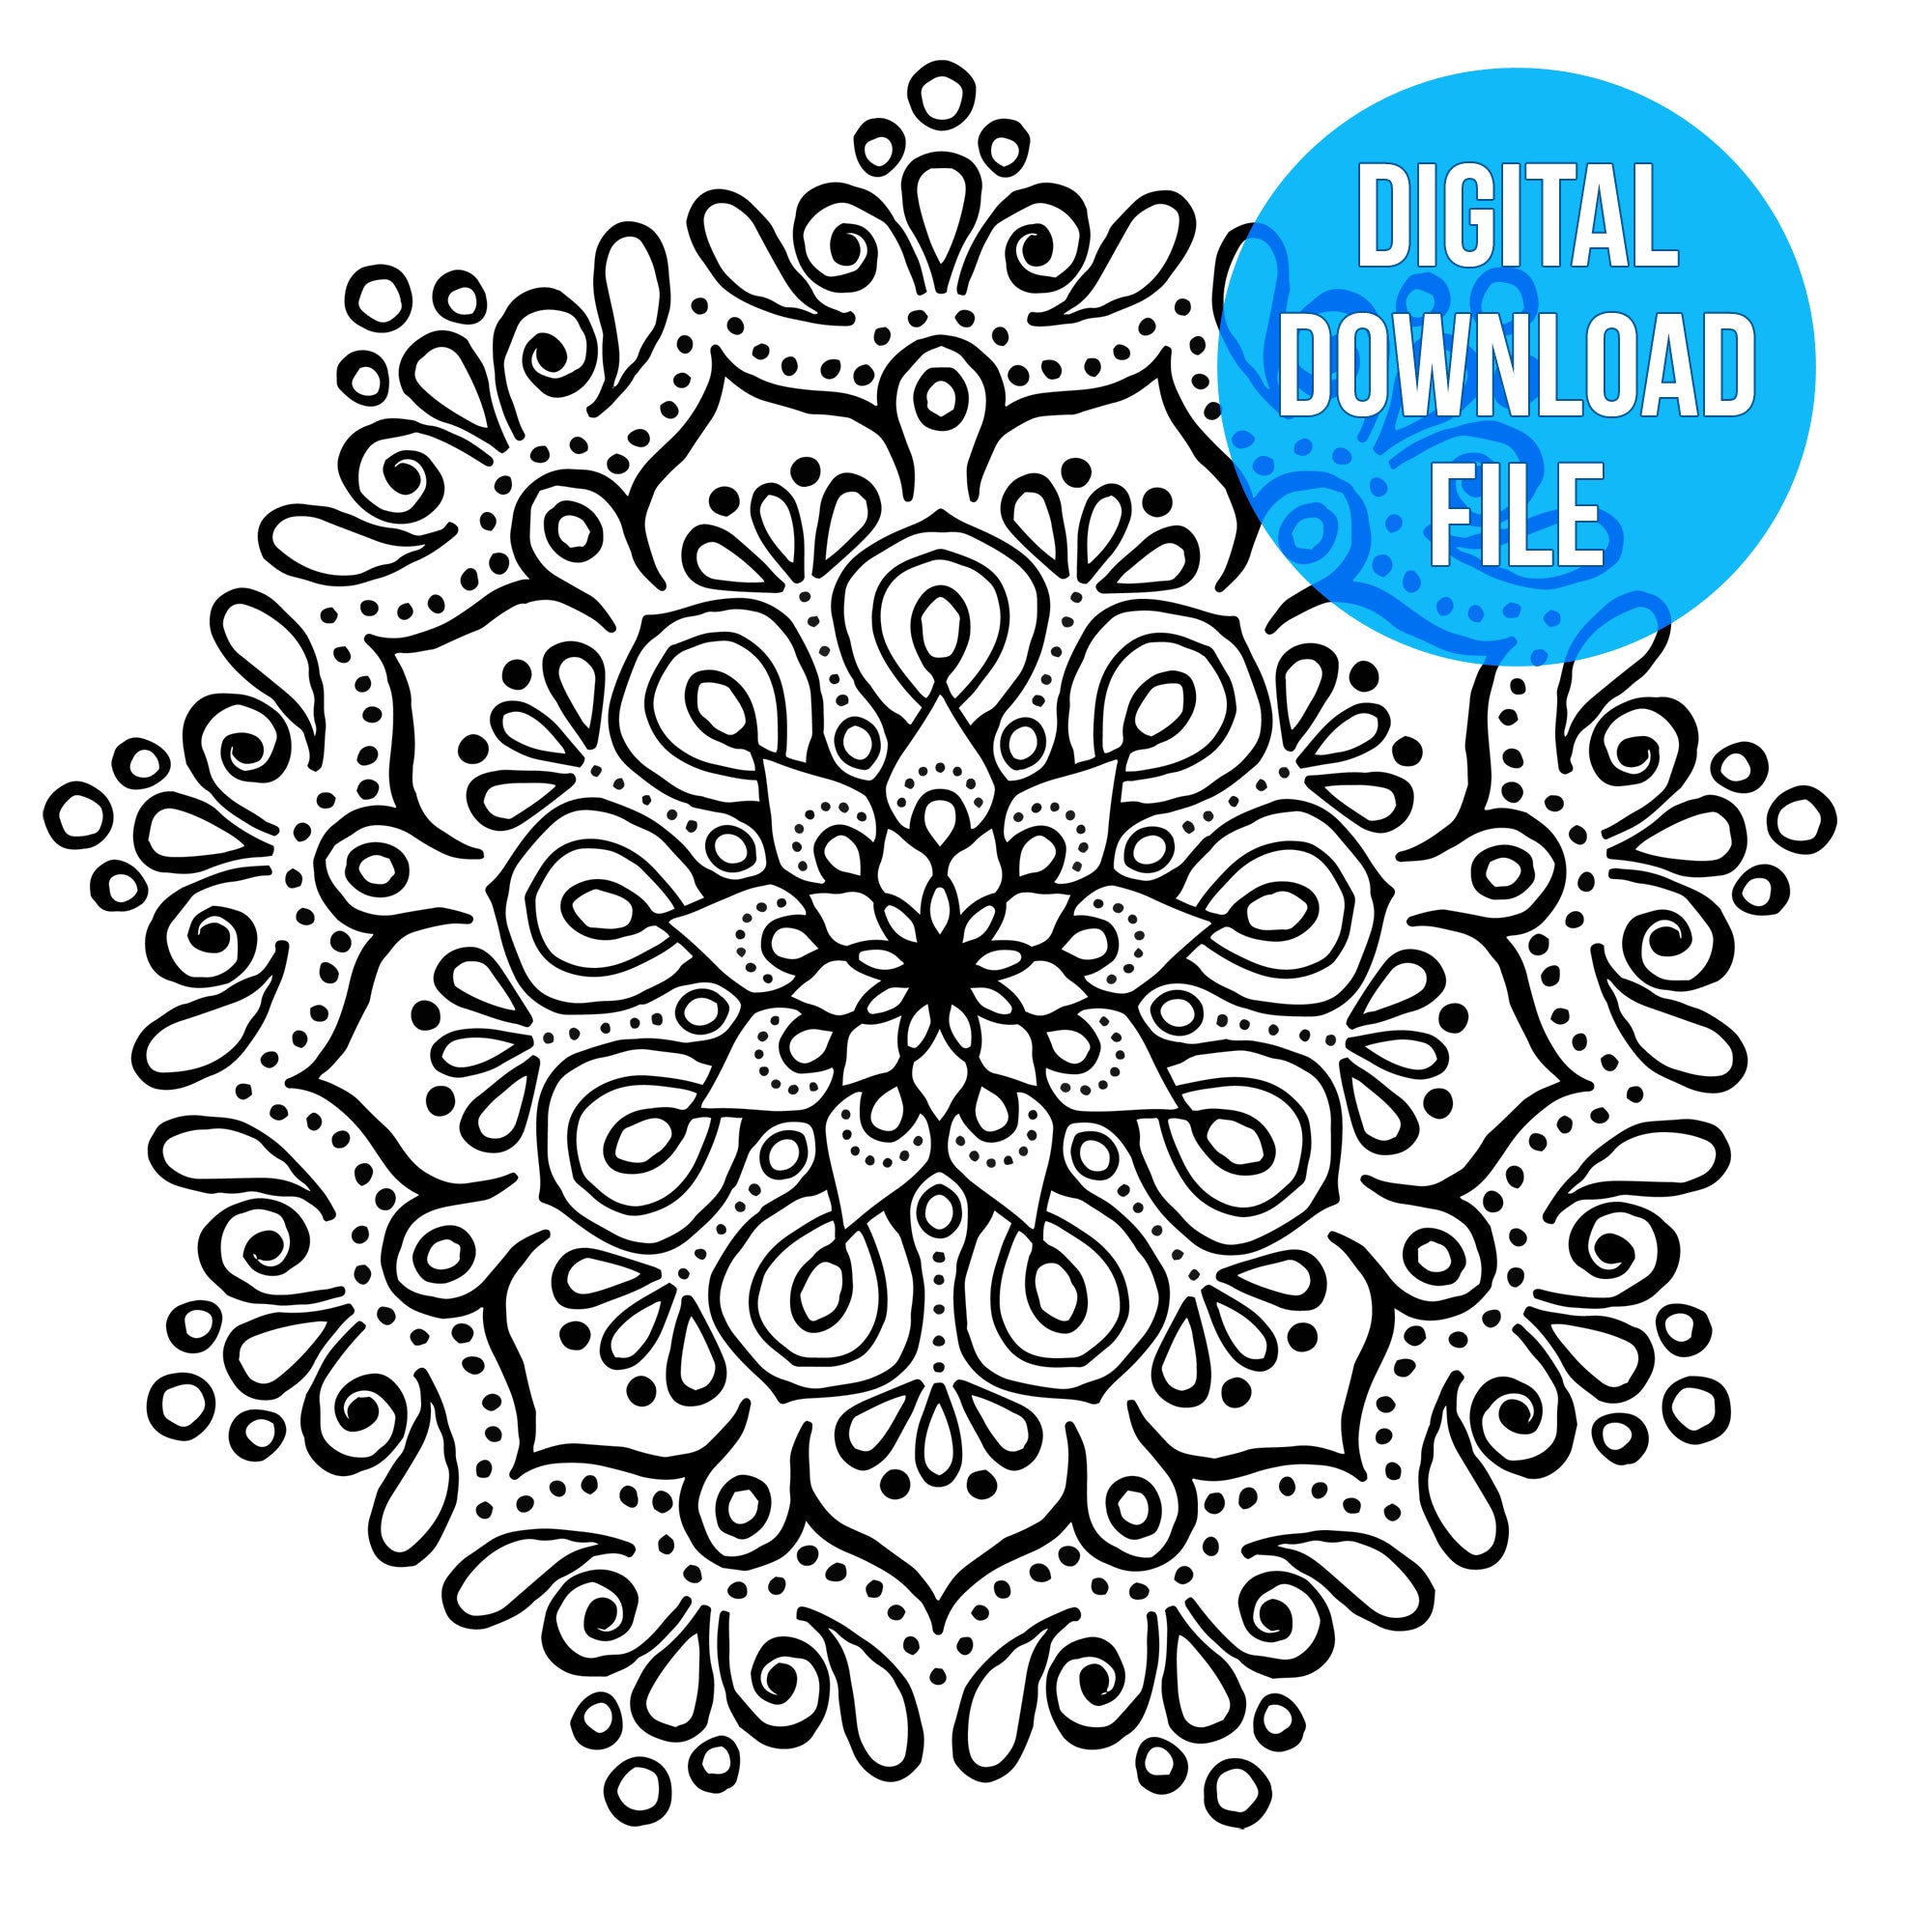 Mandala Flower Cut File for Decals Cut file only PNG, EPS, and DXF files Cricut Cut Cricut Explore car decals for women yoga decals